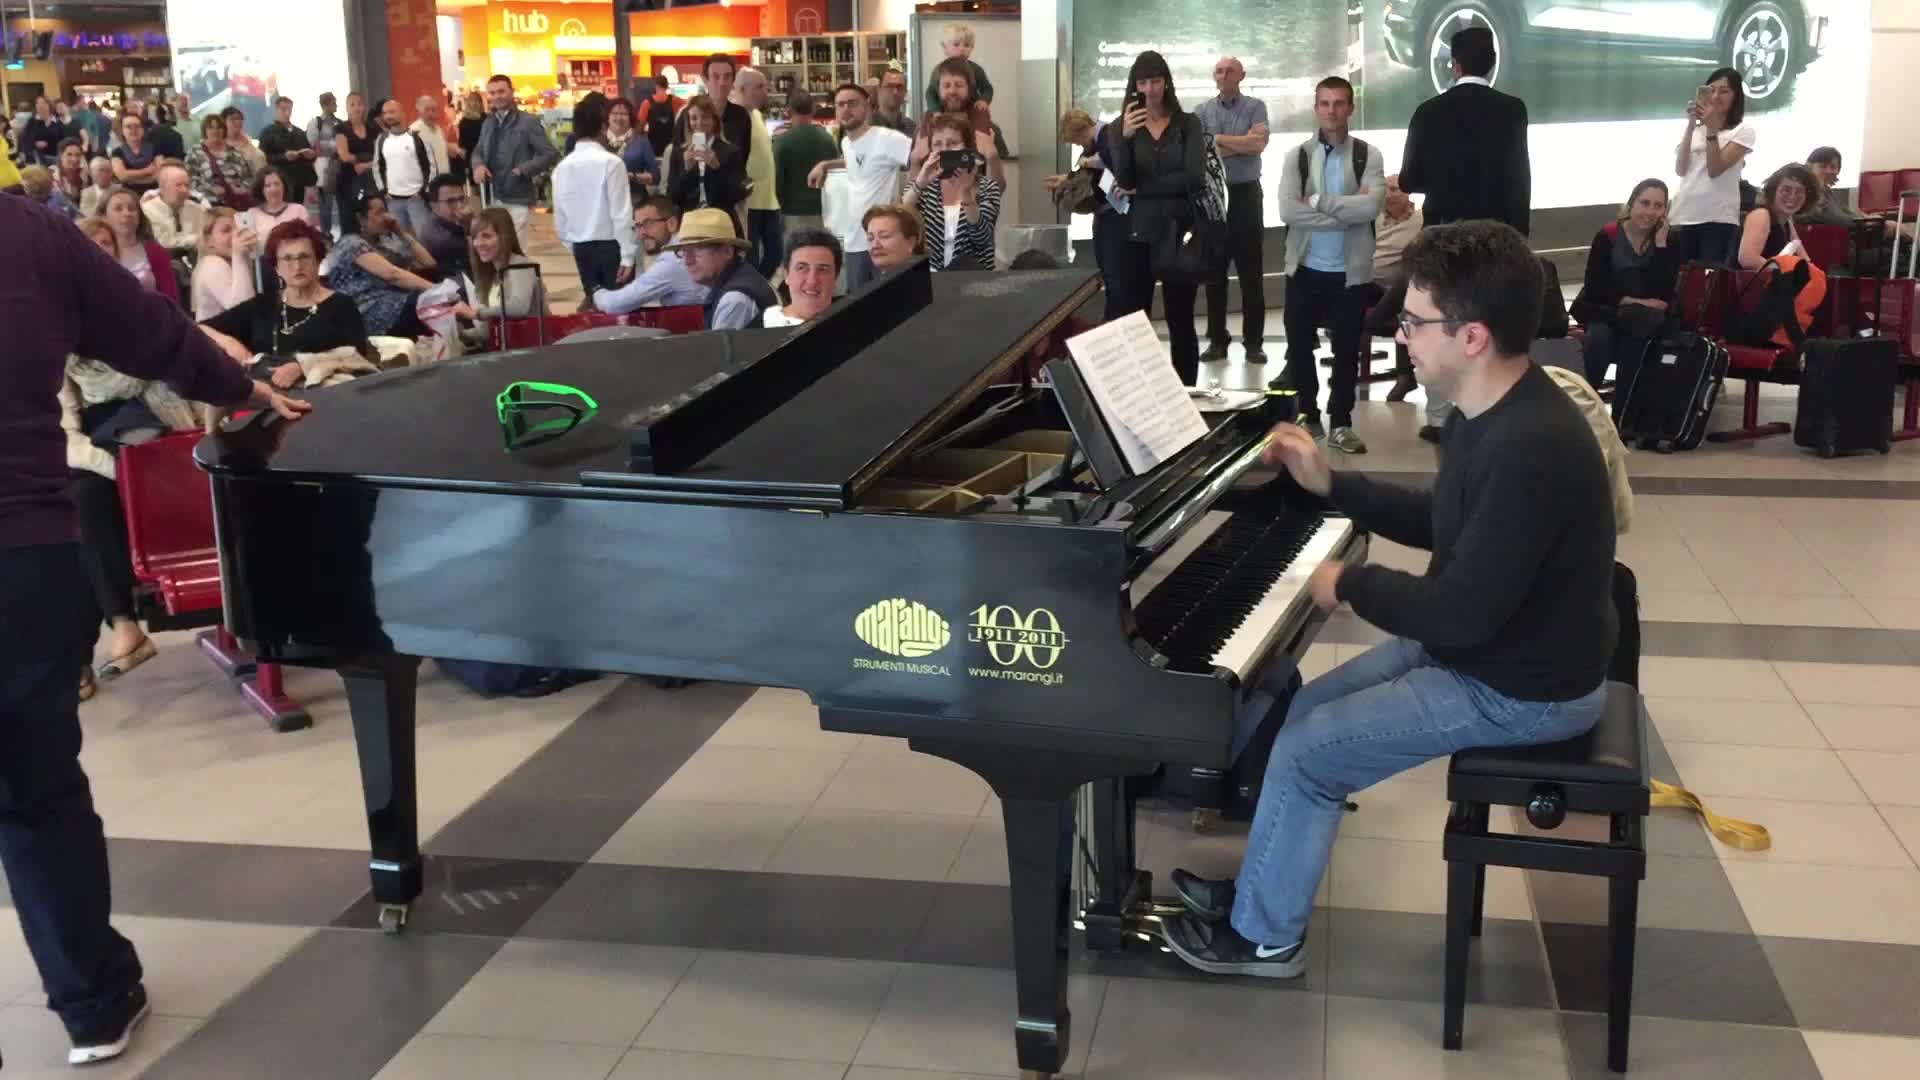 Duo Sings and Plays Piano for Crowd in Airport